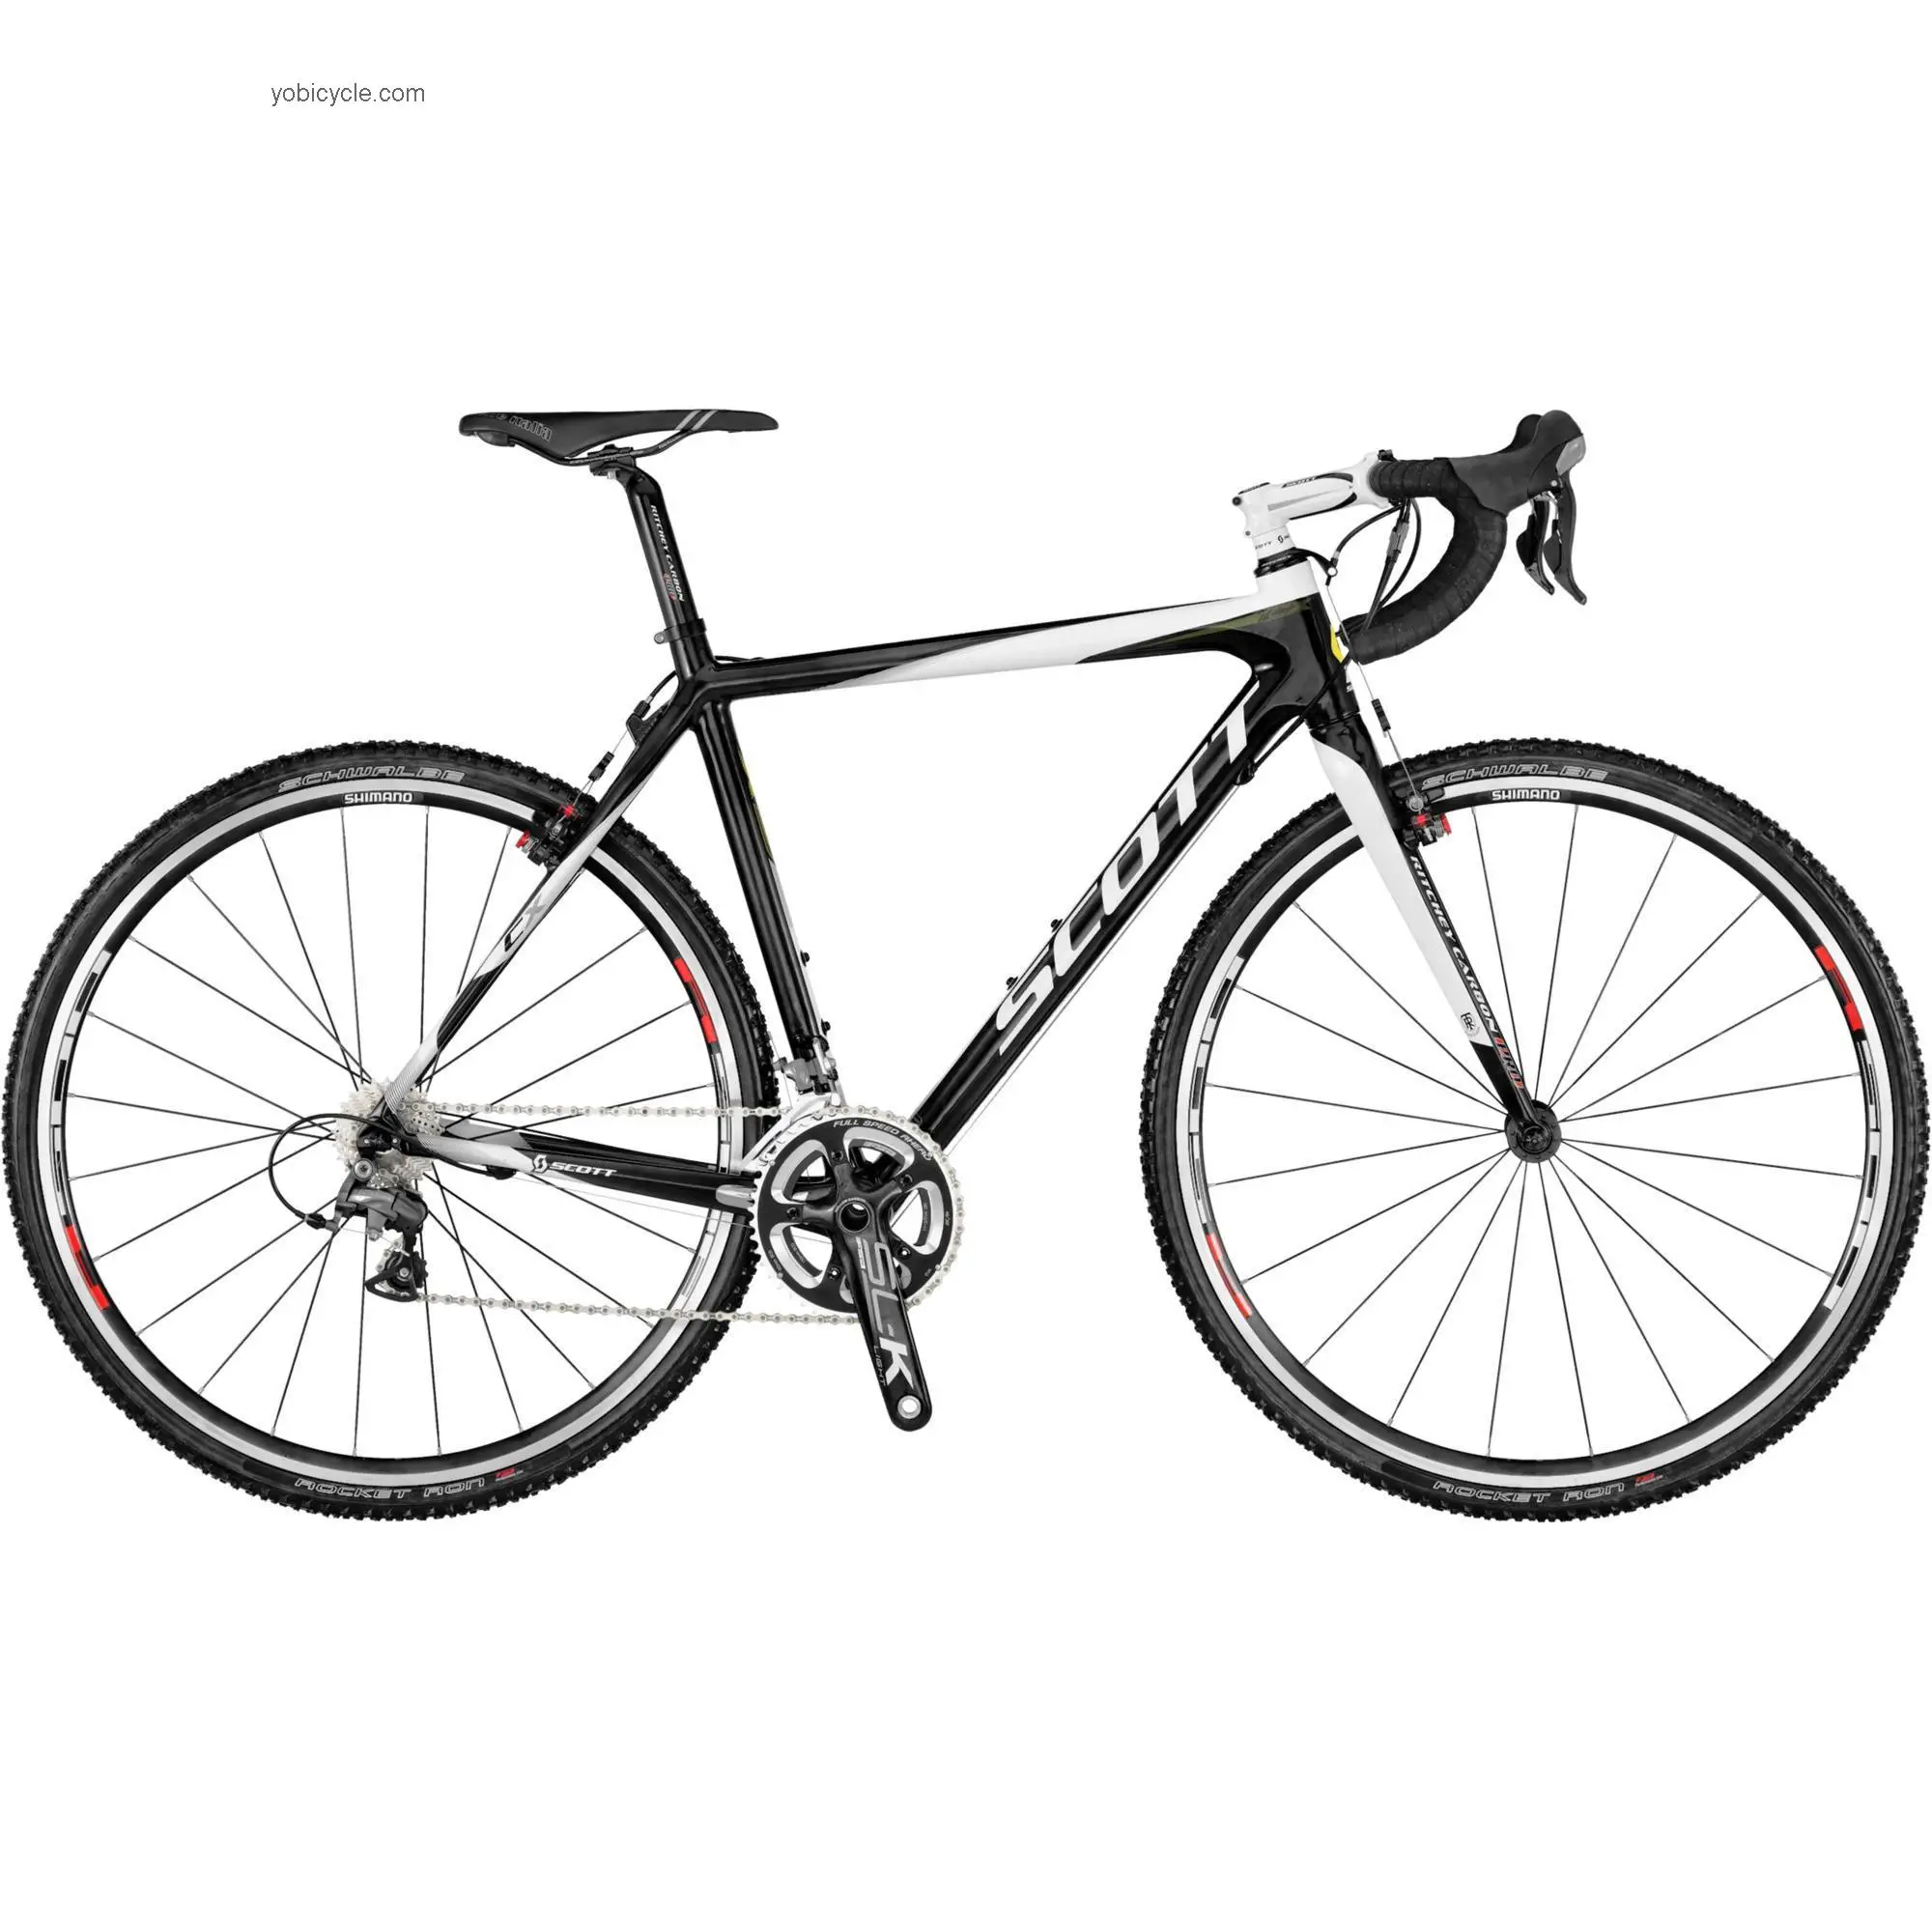 Scott  Addict CX Technical data and specifications